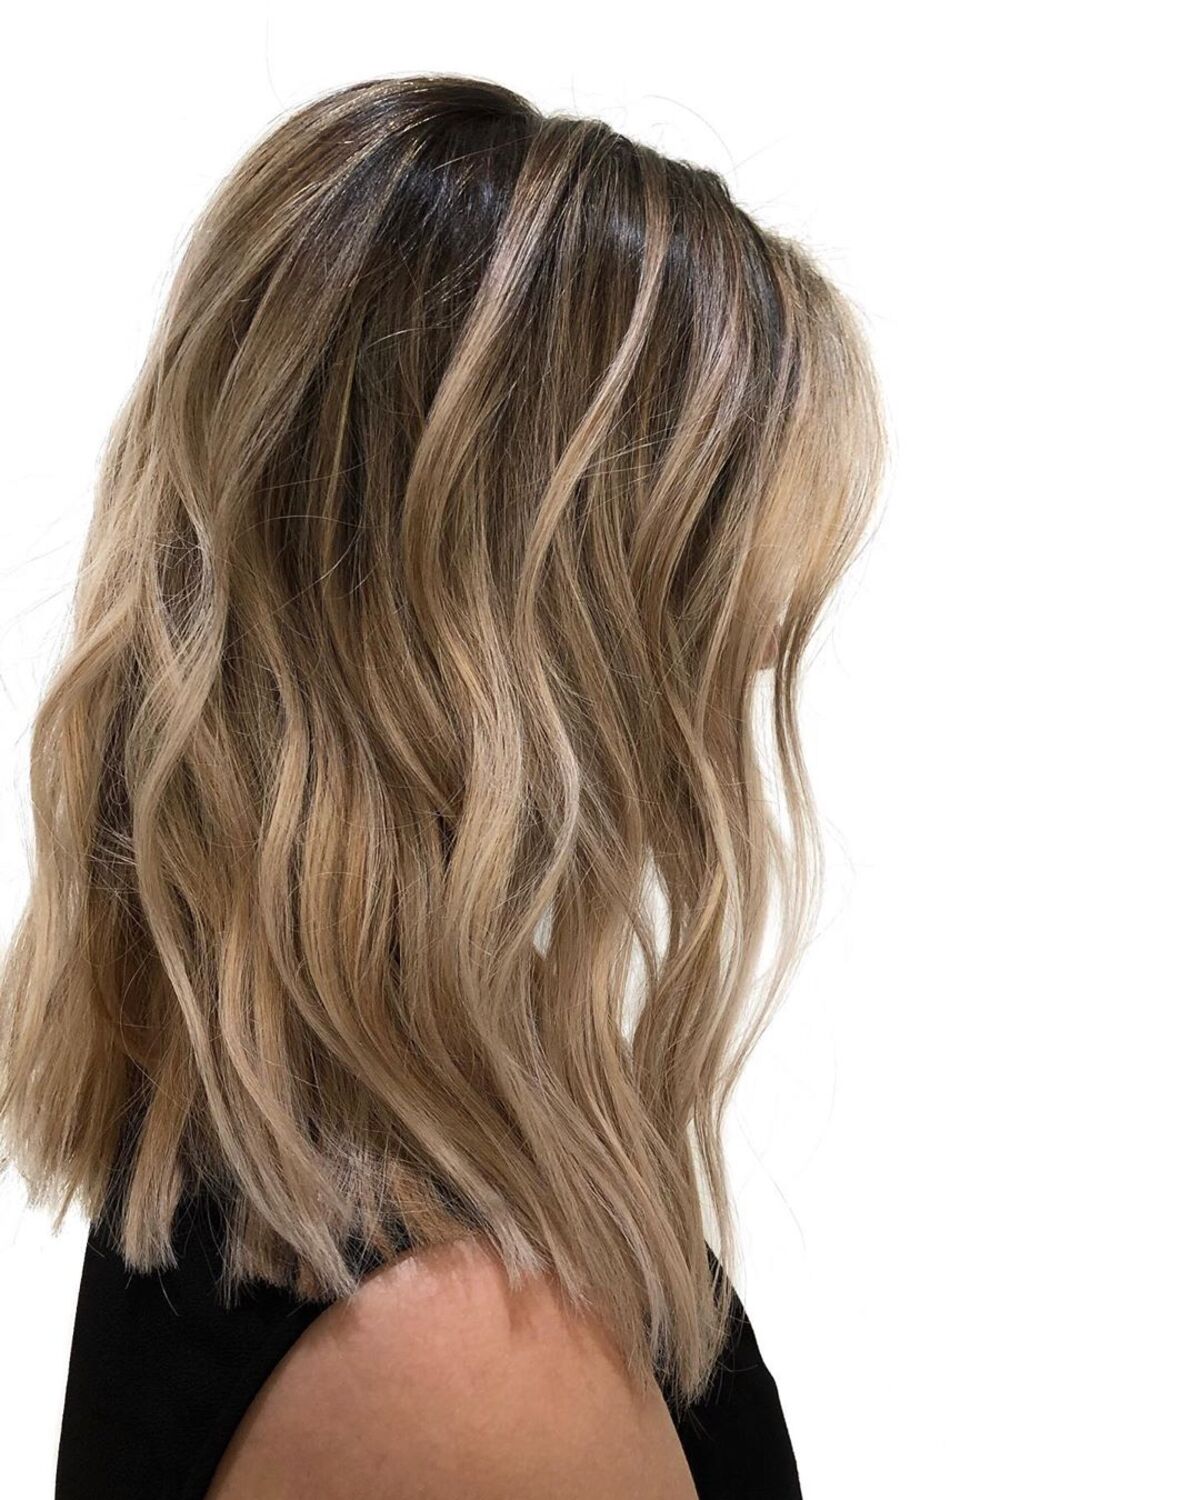 Brown with Very Light Blonde Highlights